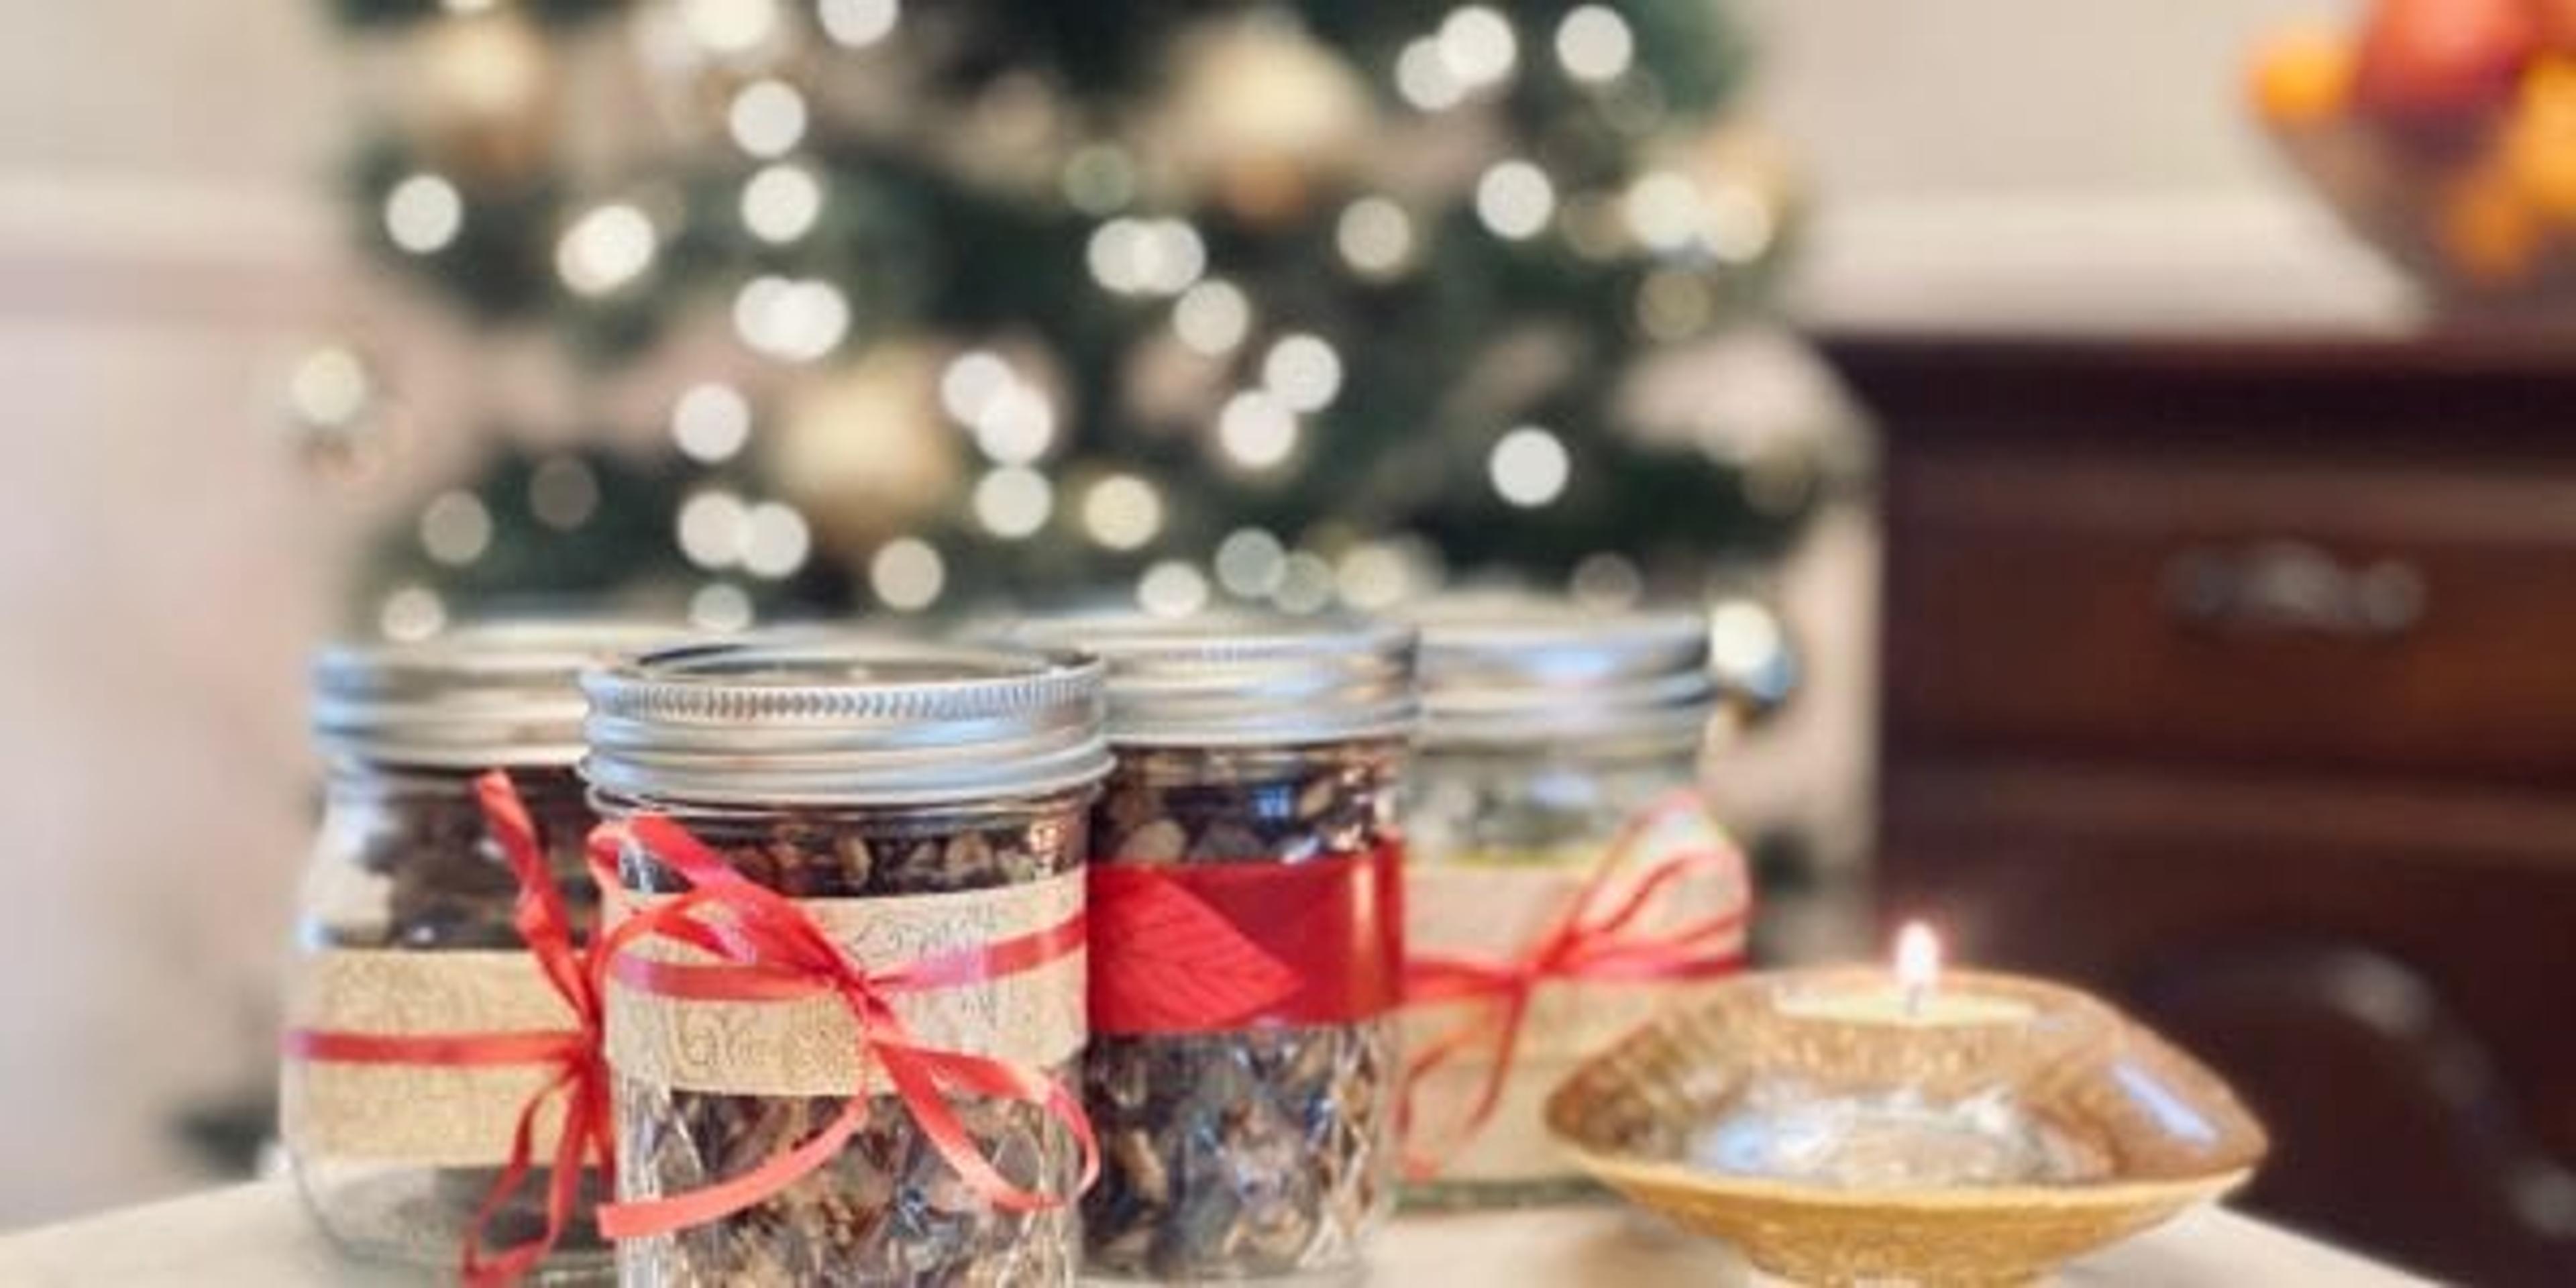 Mason jar gifts in front of a lit Christmas tree